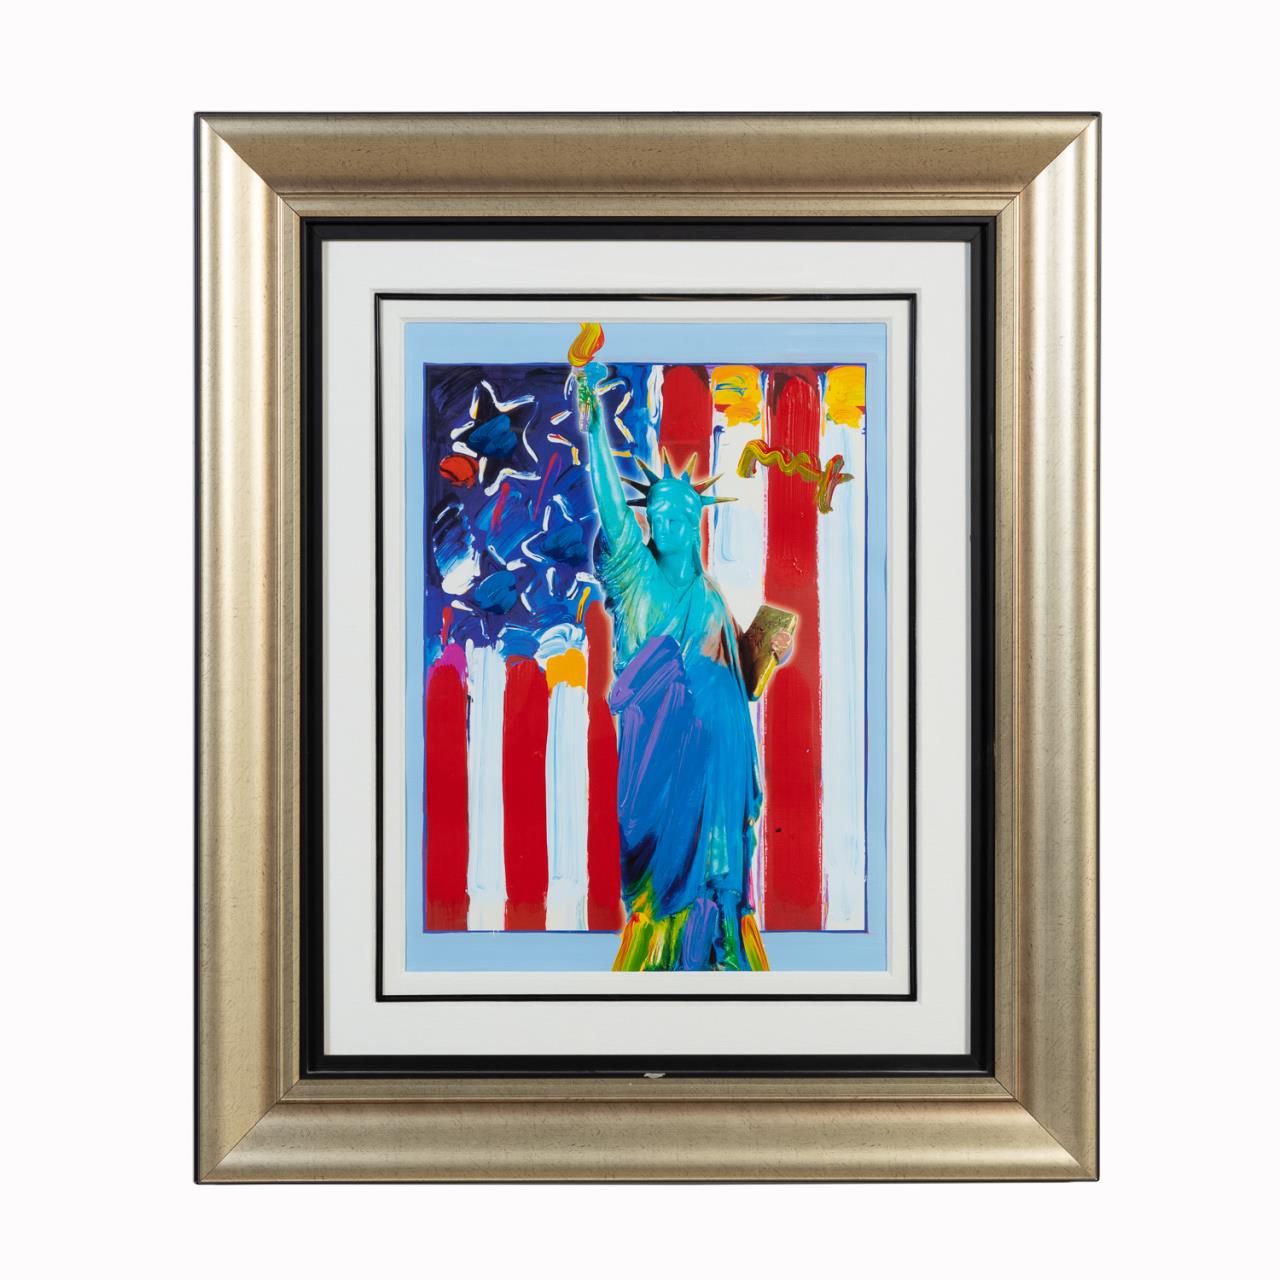 PETER MAX MM W LITHOGRAPH UNITED 2c00f6